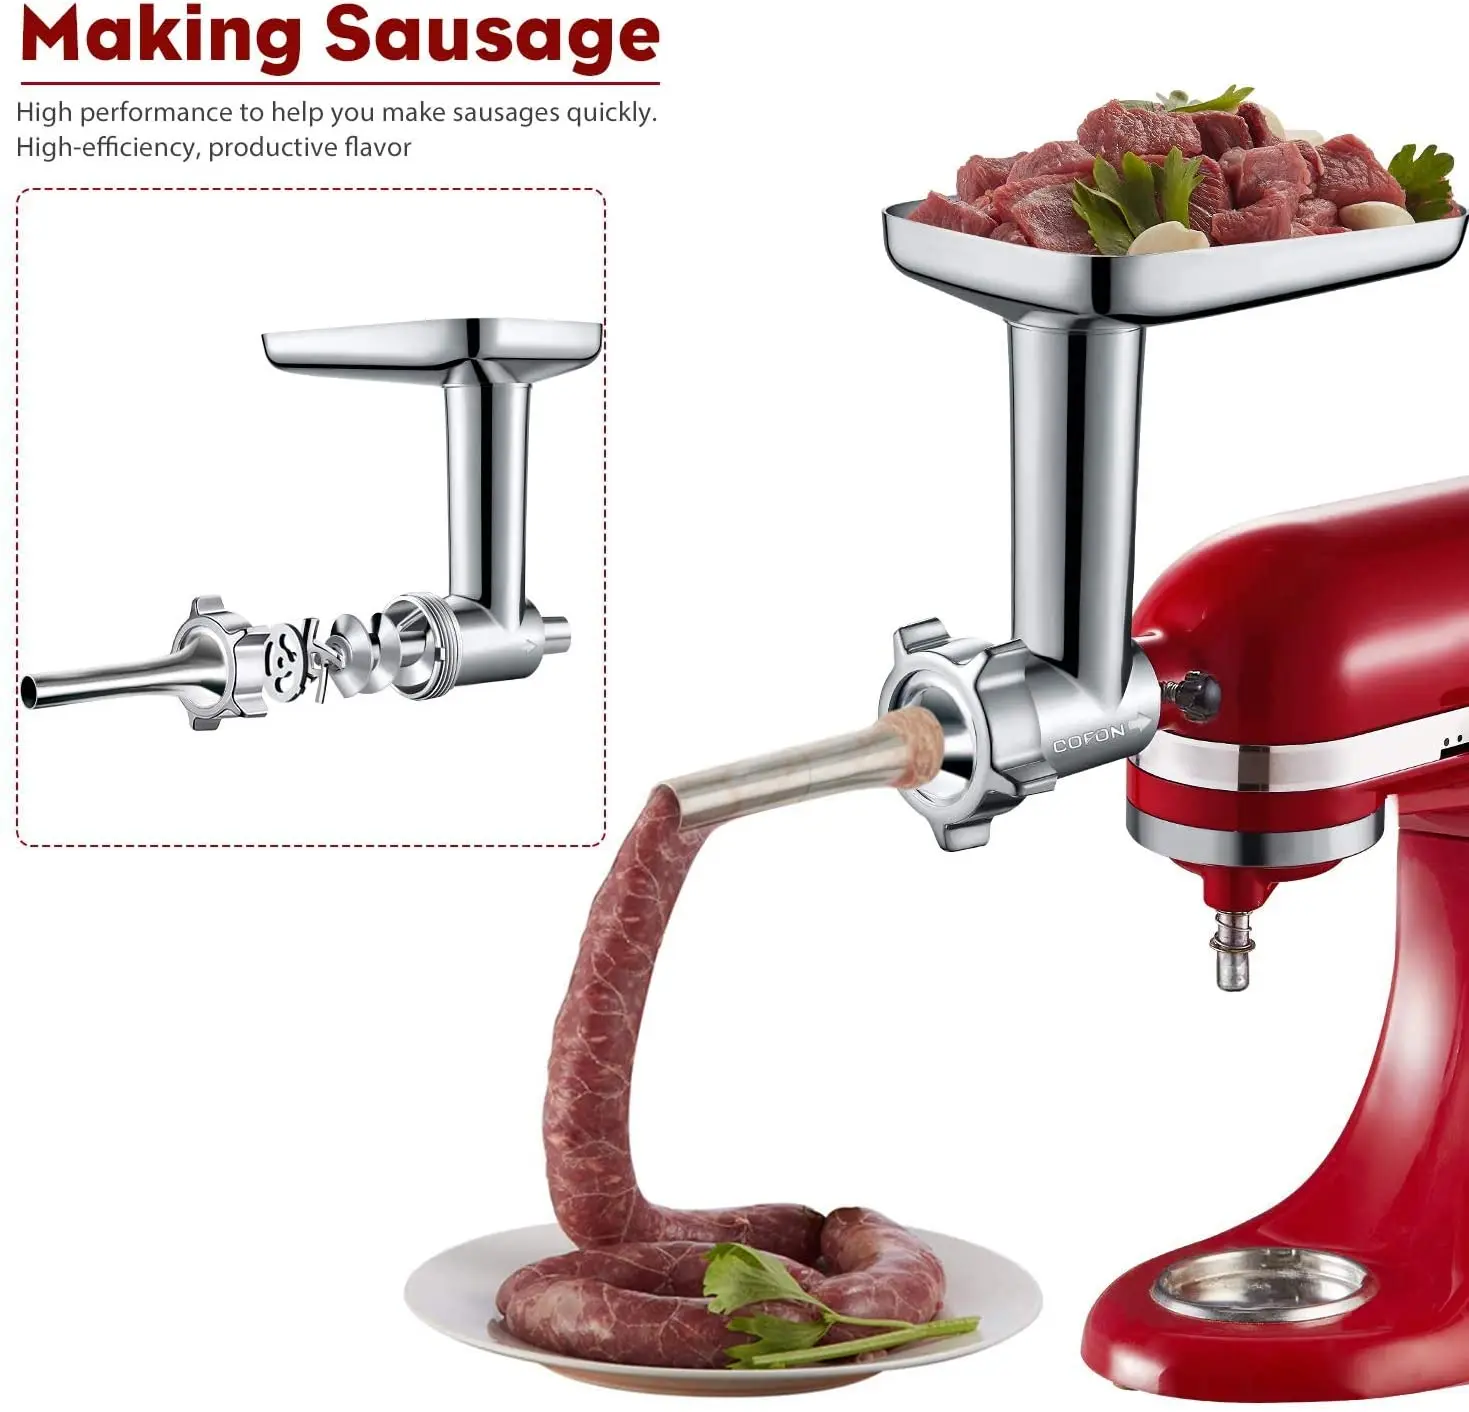 https://ae01.alicdn.com/kf/Hd63b1f459b3f4dacbc5d390a15df5d11b/Metal-Food-Grinder-Attachments-for-KitchenAid-Stand-Mixers-Durable-Meat-Grinder-Sausage-Stuffer-Attachment-Compatible-Tools.jpg